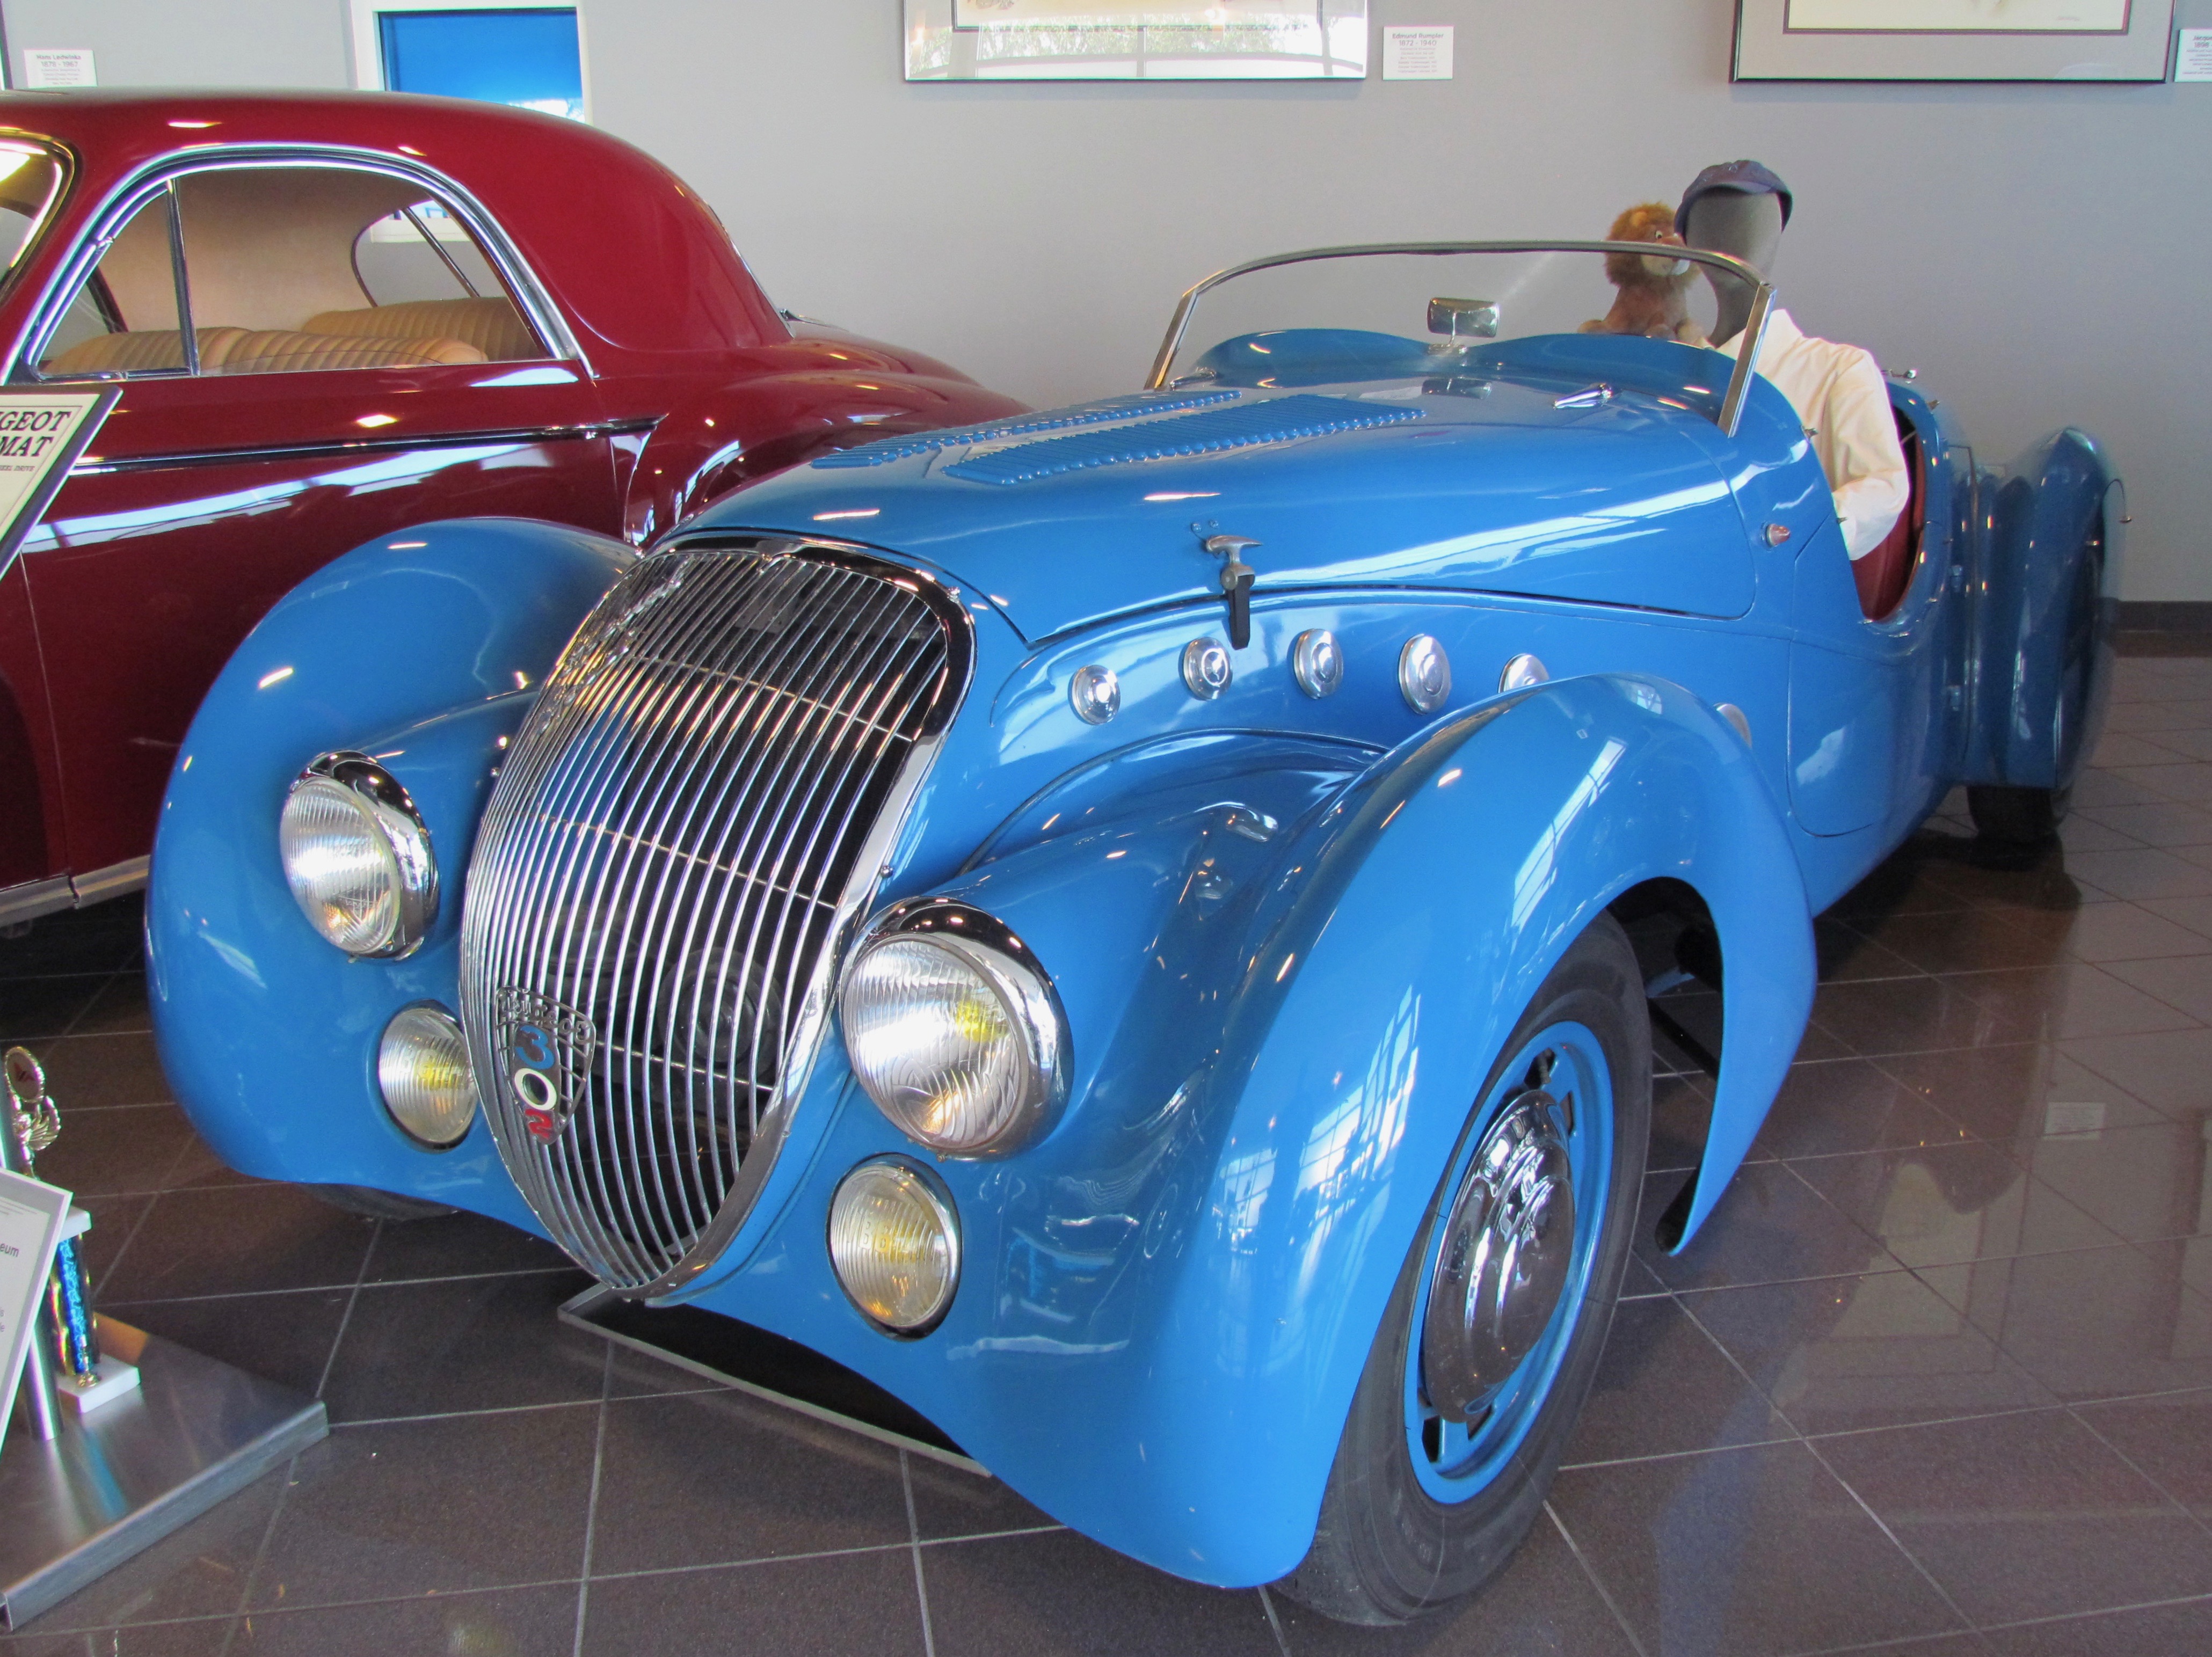 Tampa Bay, Tampa Bay’s automotive attraction, ClassicCars.com Journal